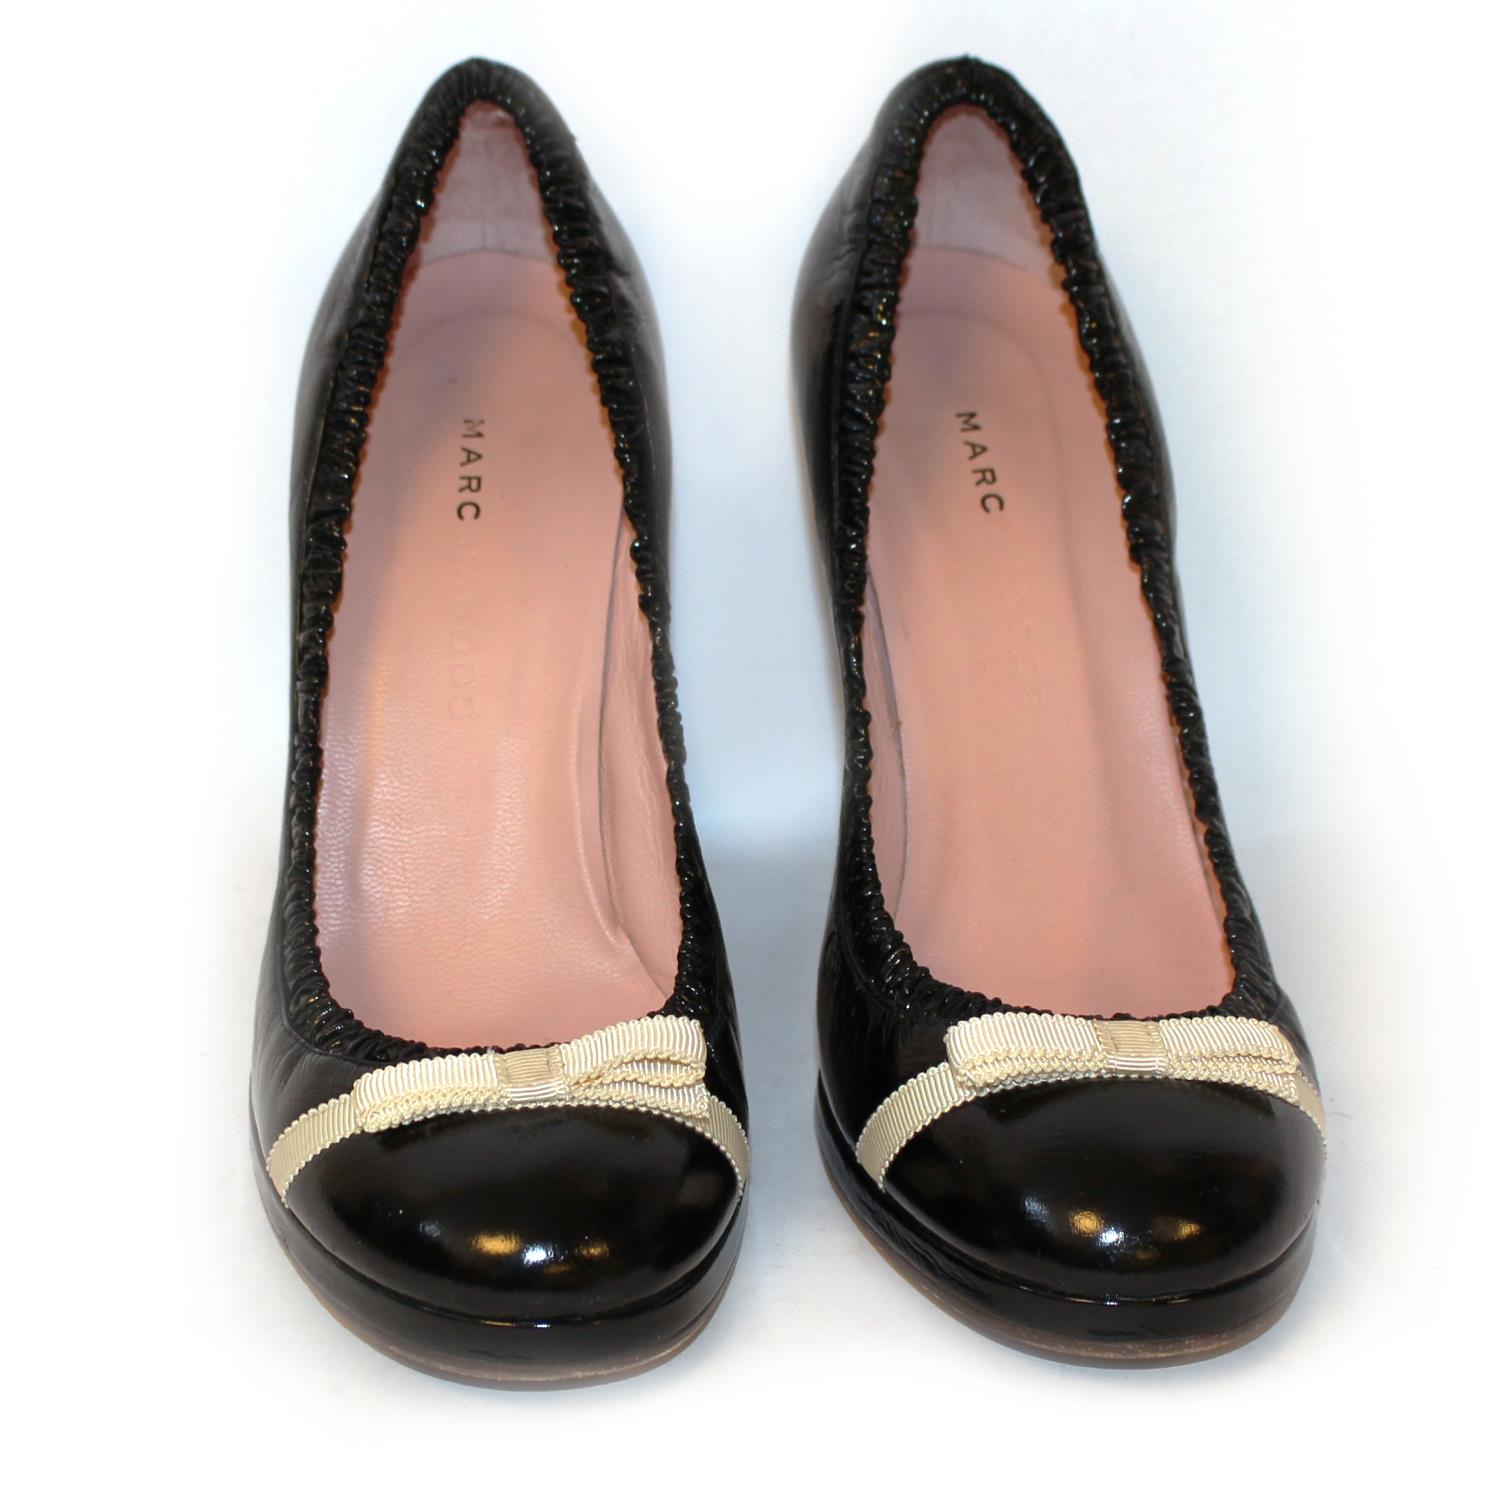 MARC JACOBS, BLACK PATENT LEATHER HEELS With a ruffled edge, cream fabric bow (size 39½). (heel - Image 2 of 5